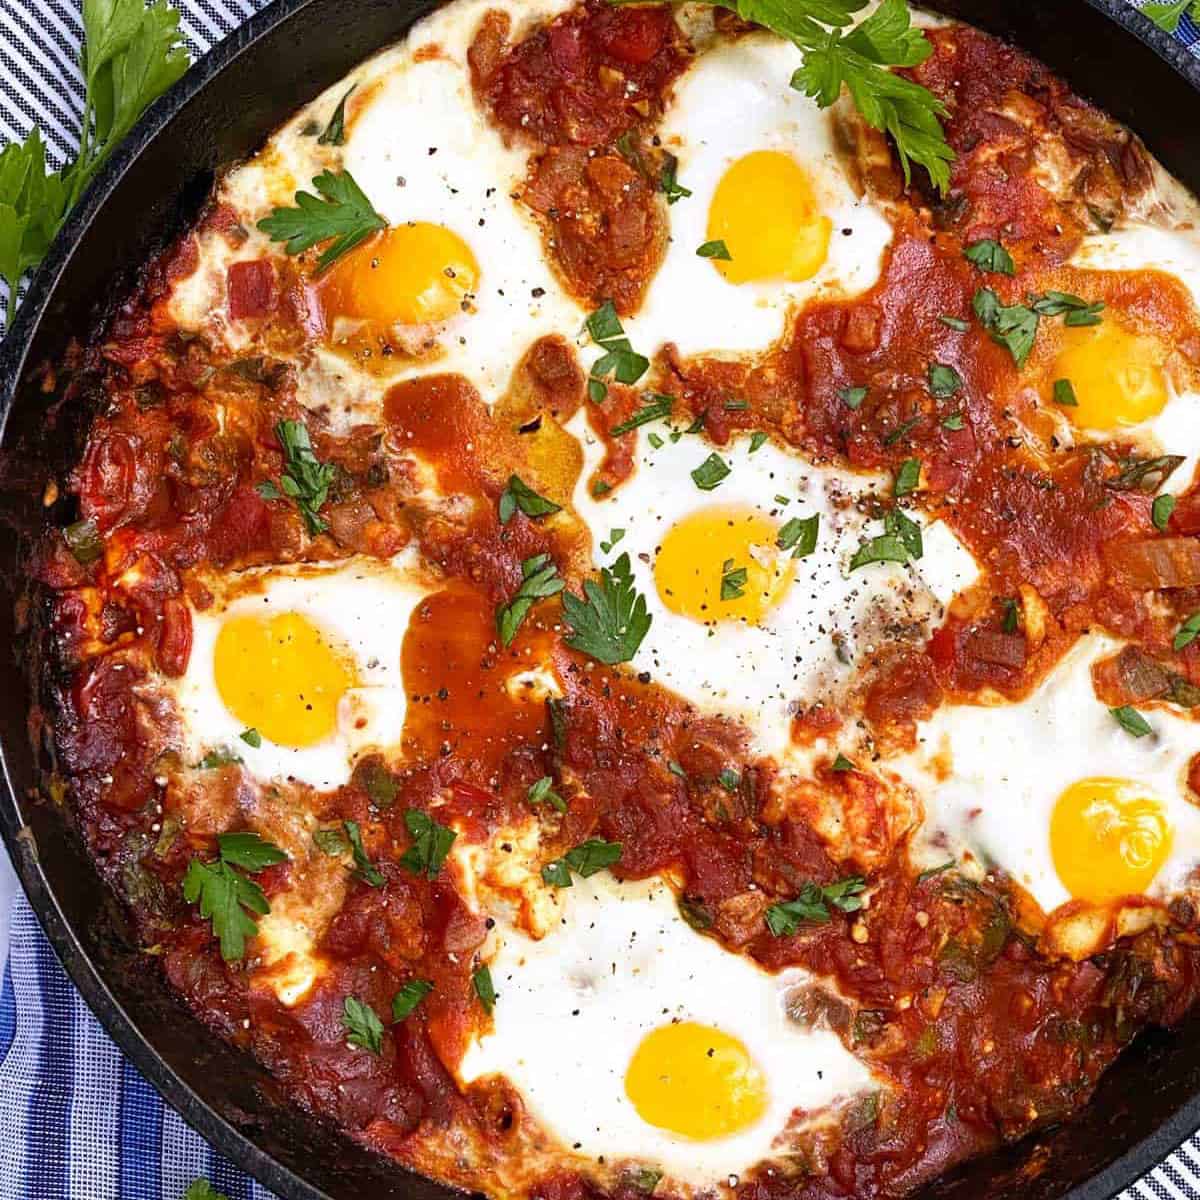 rich tomato sauce with peppers in a cast iron skillet topped with 7 cooked eggs and parsley leaves to garnish